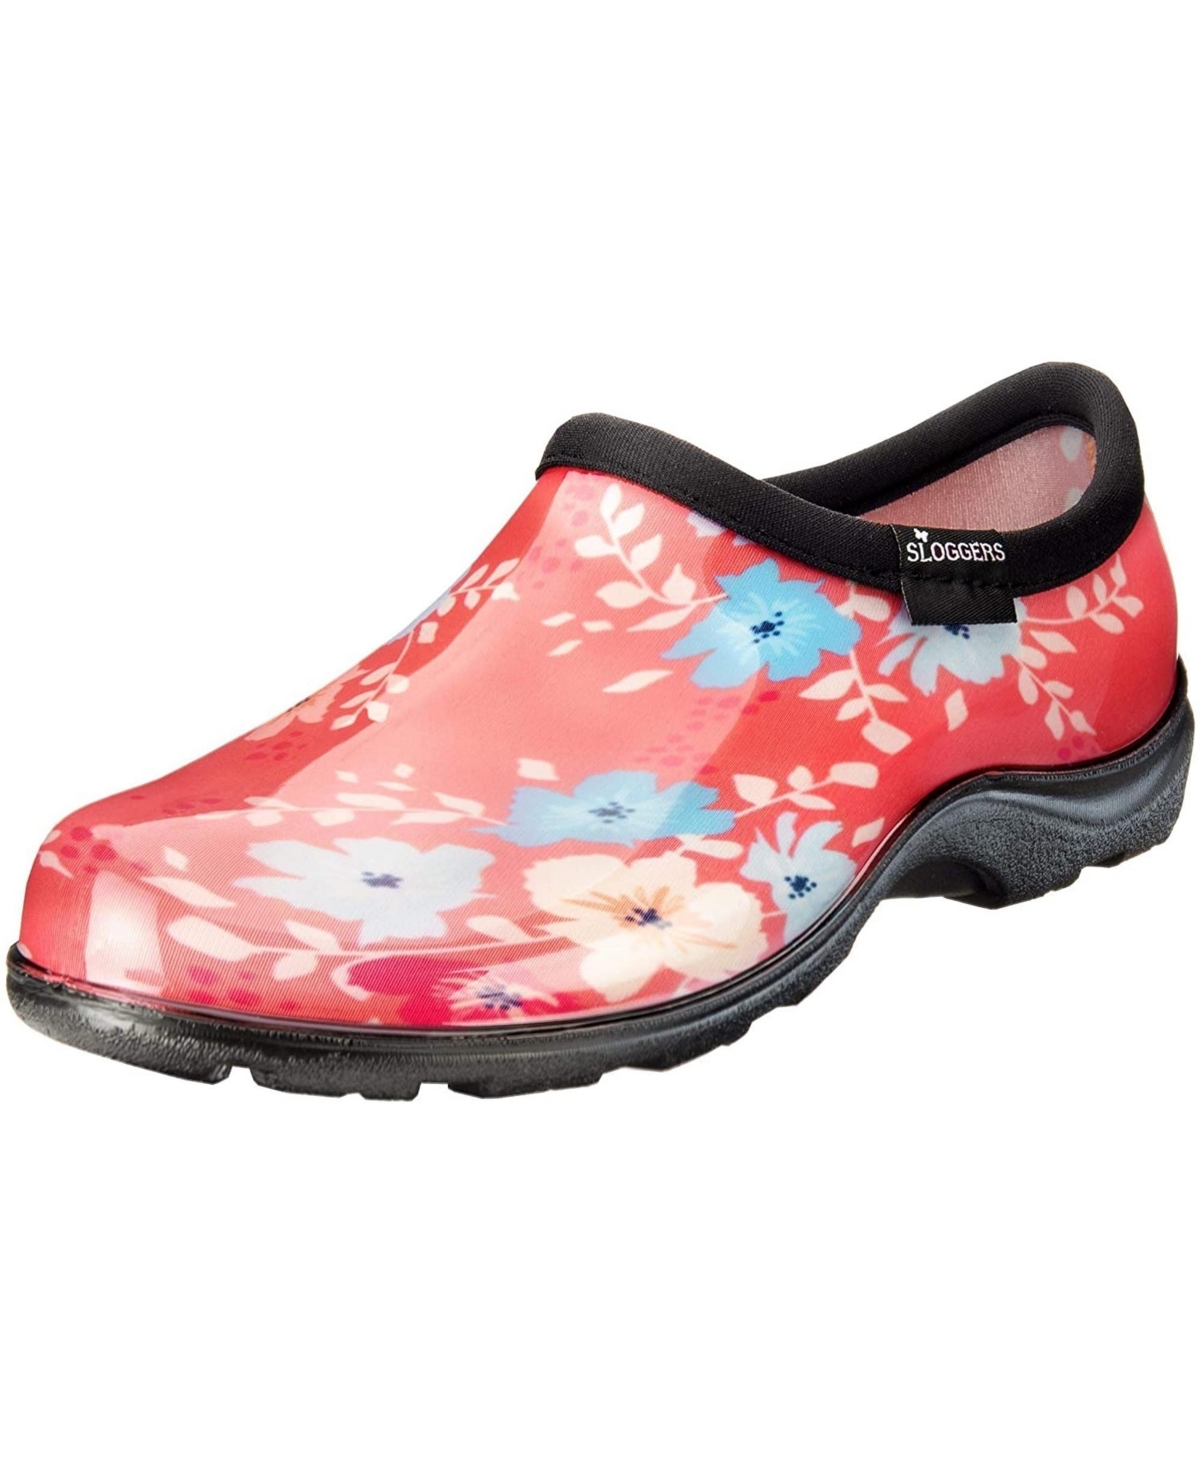 Sloggers Womens Waterproof Comfort Shoes, Coral Floral Fun Print, Size 10 In Multi